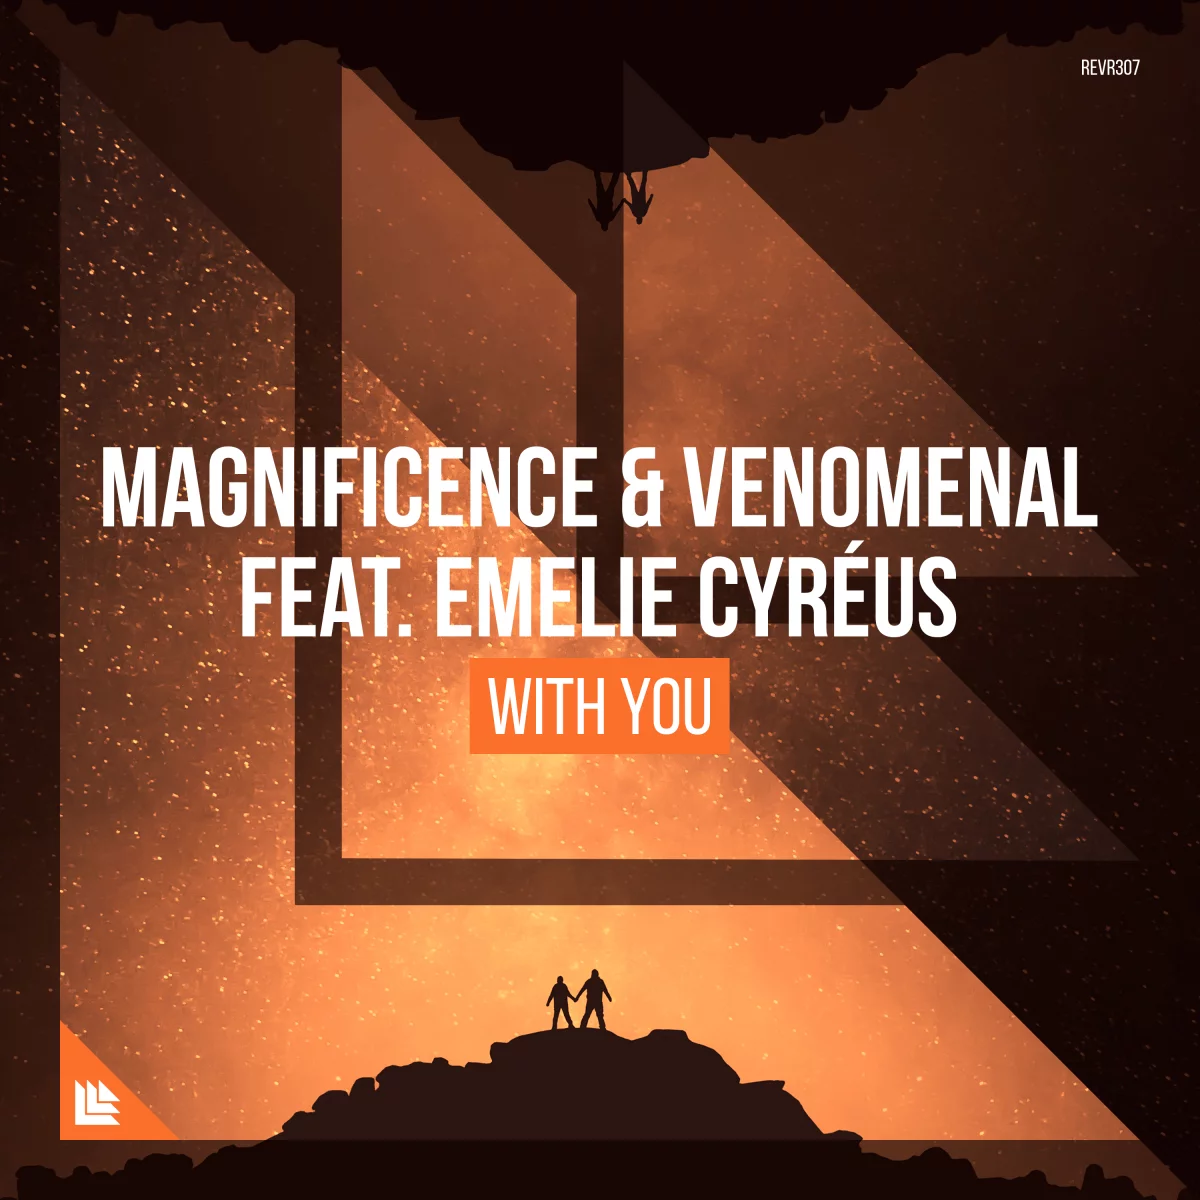 With You - Magnificence & Venomenal feat. Emelie Cyréus